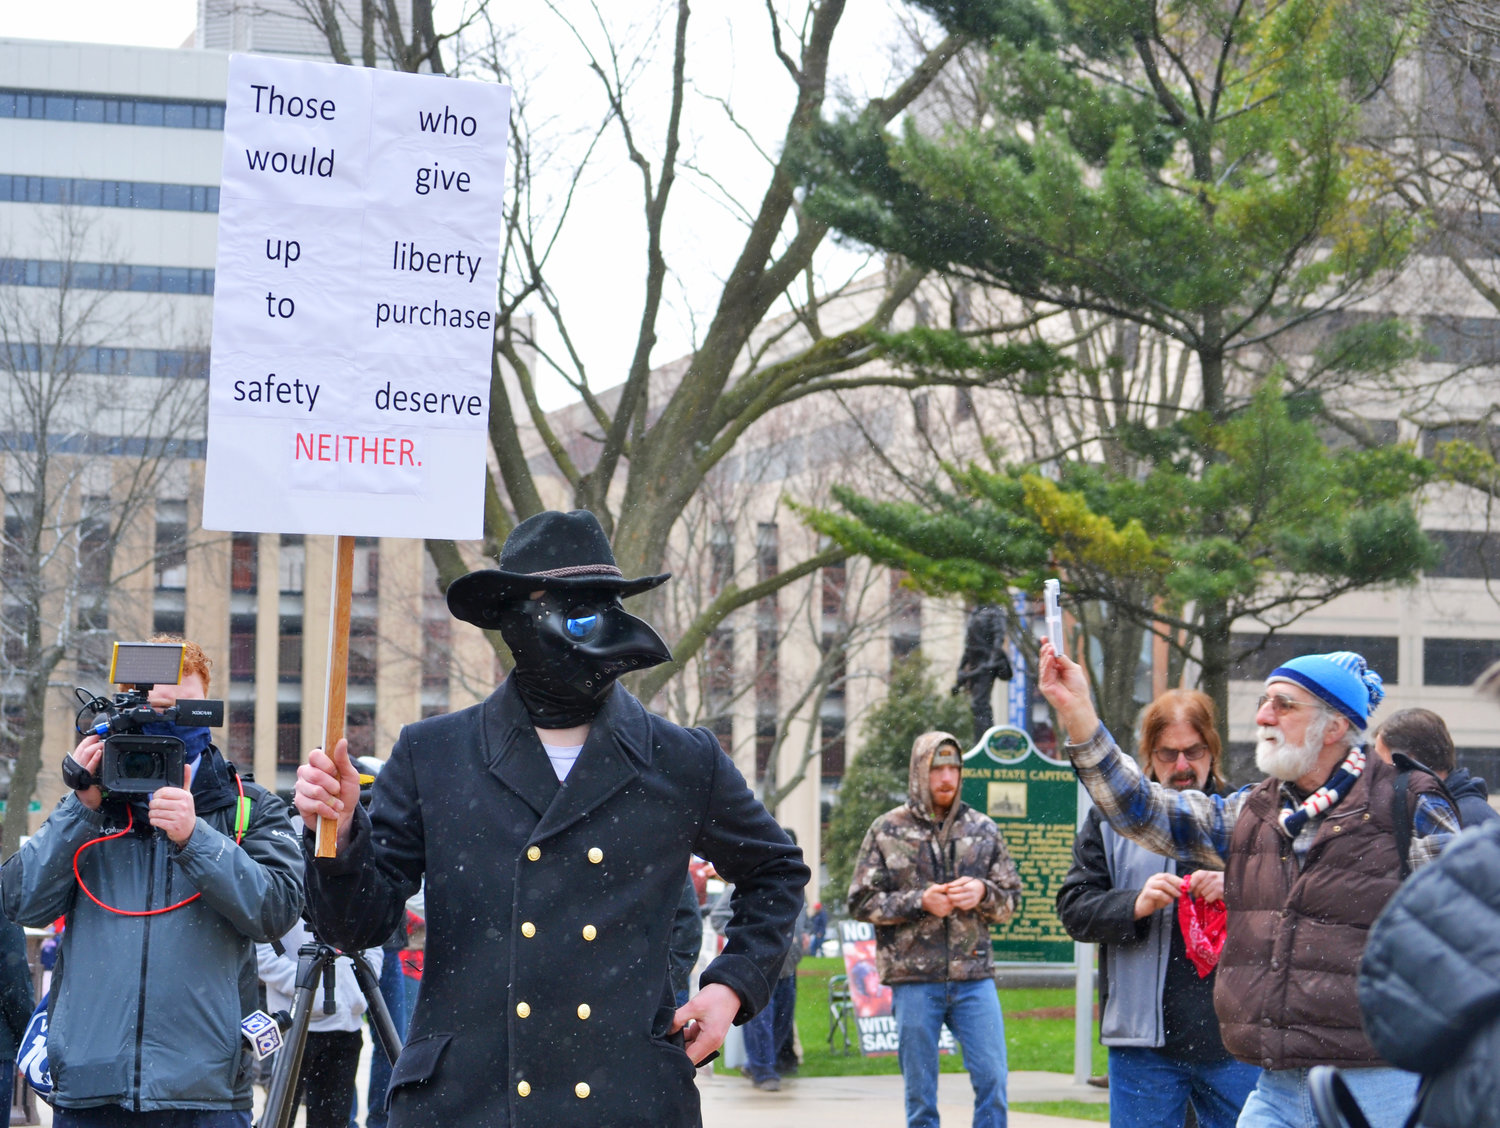 A man dons a plague doctor outfit at the protest today.